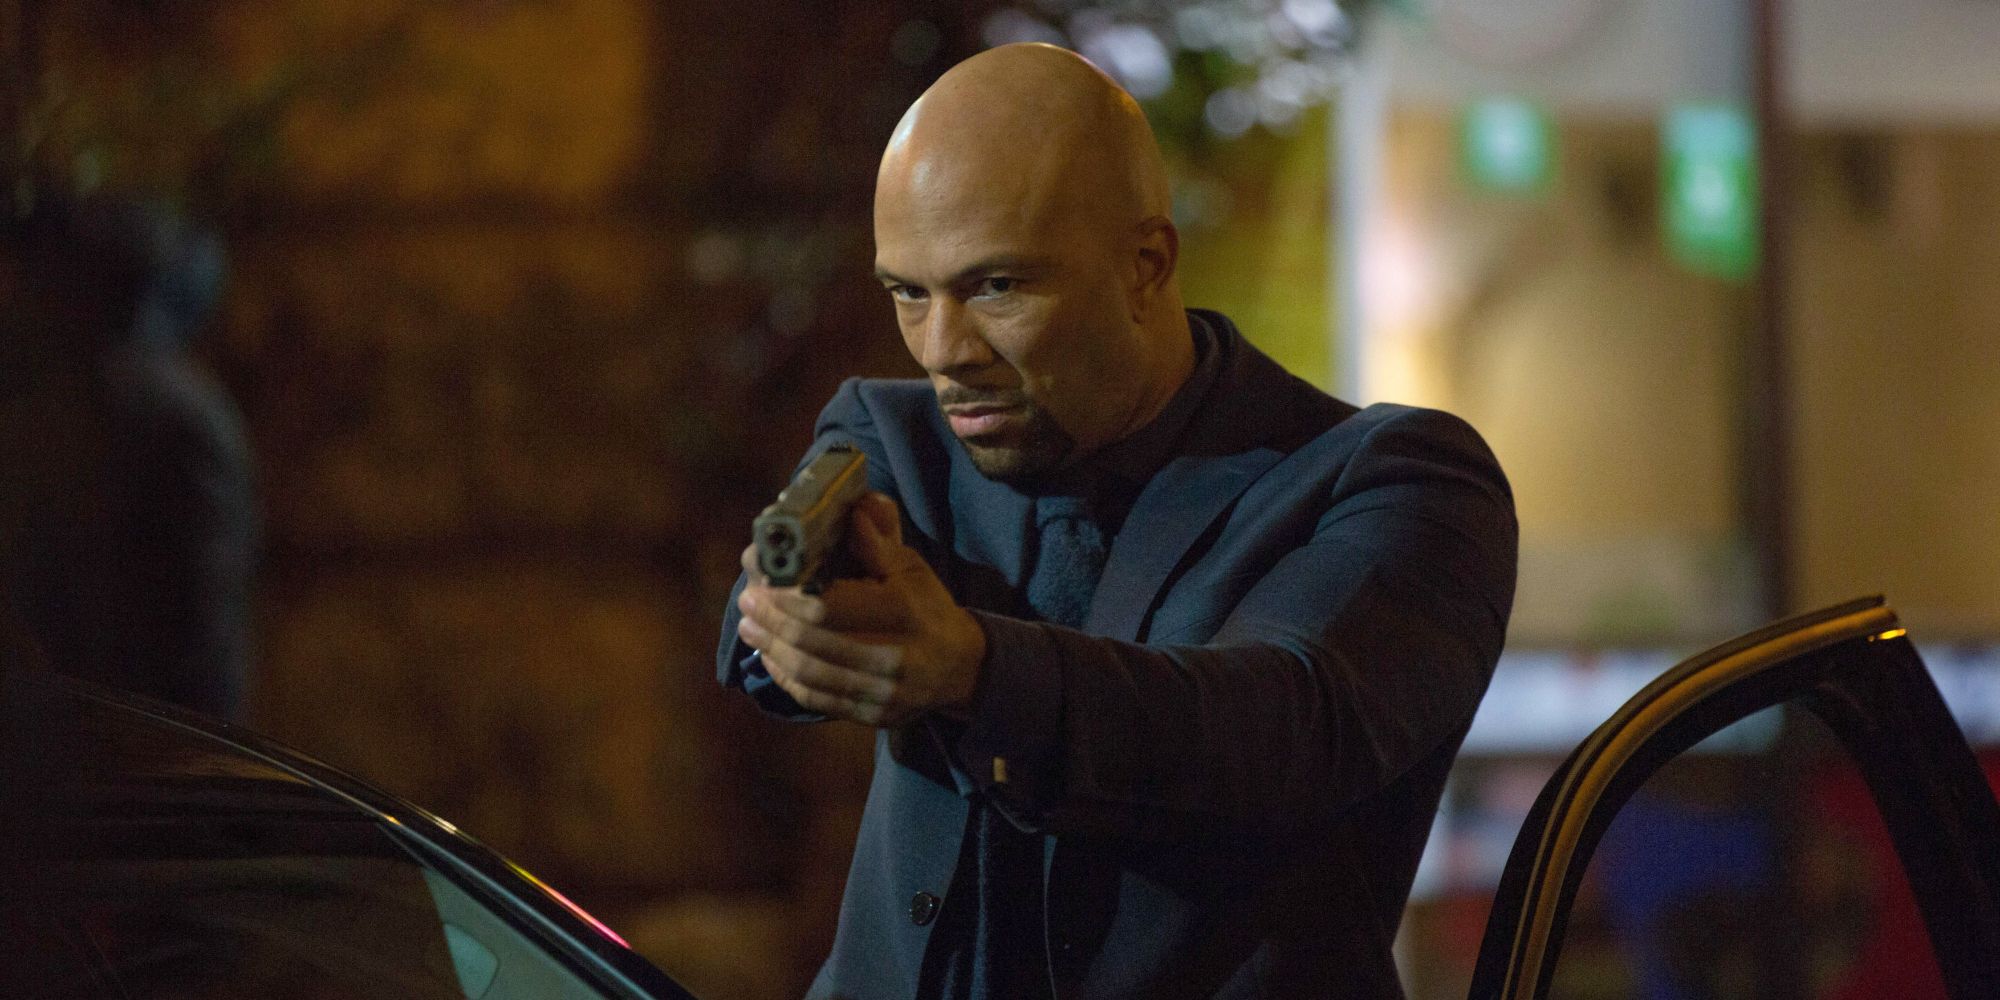 John Wick Top 10 Criminals In The Franchise Ranked by Intelligence